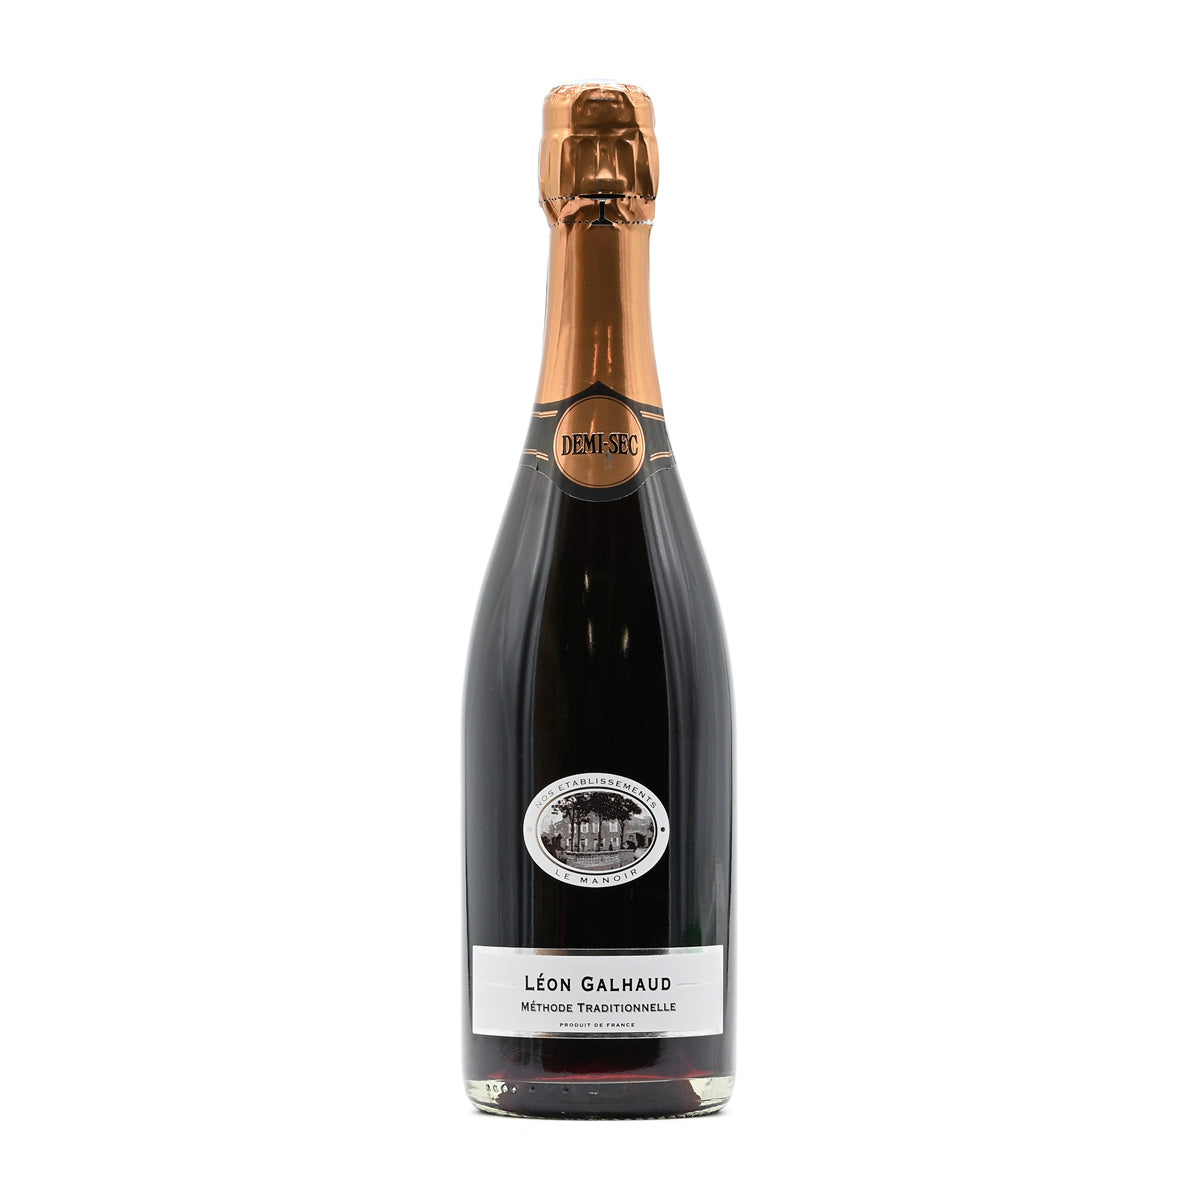 Leon Galhaud Demi-Sec Sparkling Red wine, made with Champagne Method, from Southern France – GDV Fine Wines, Hong Kong